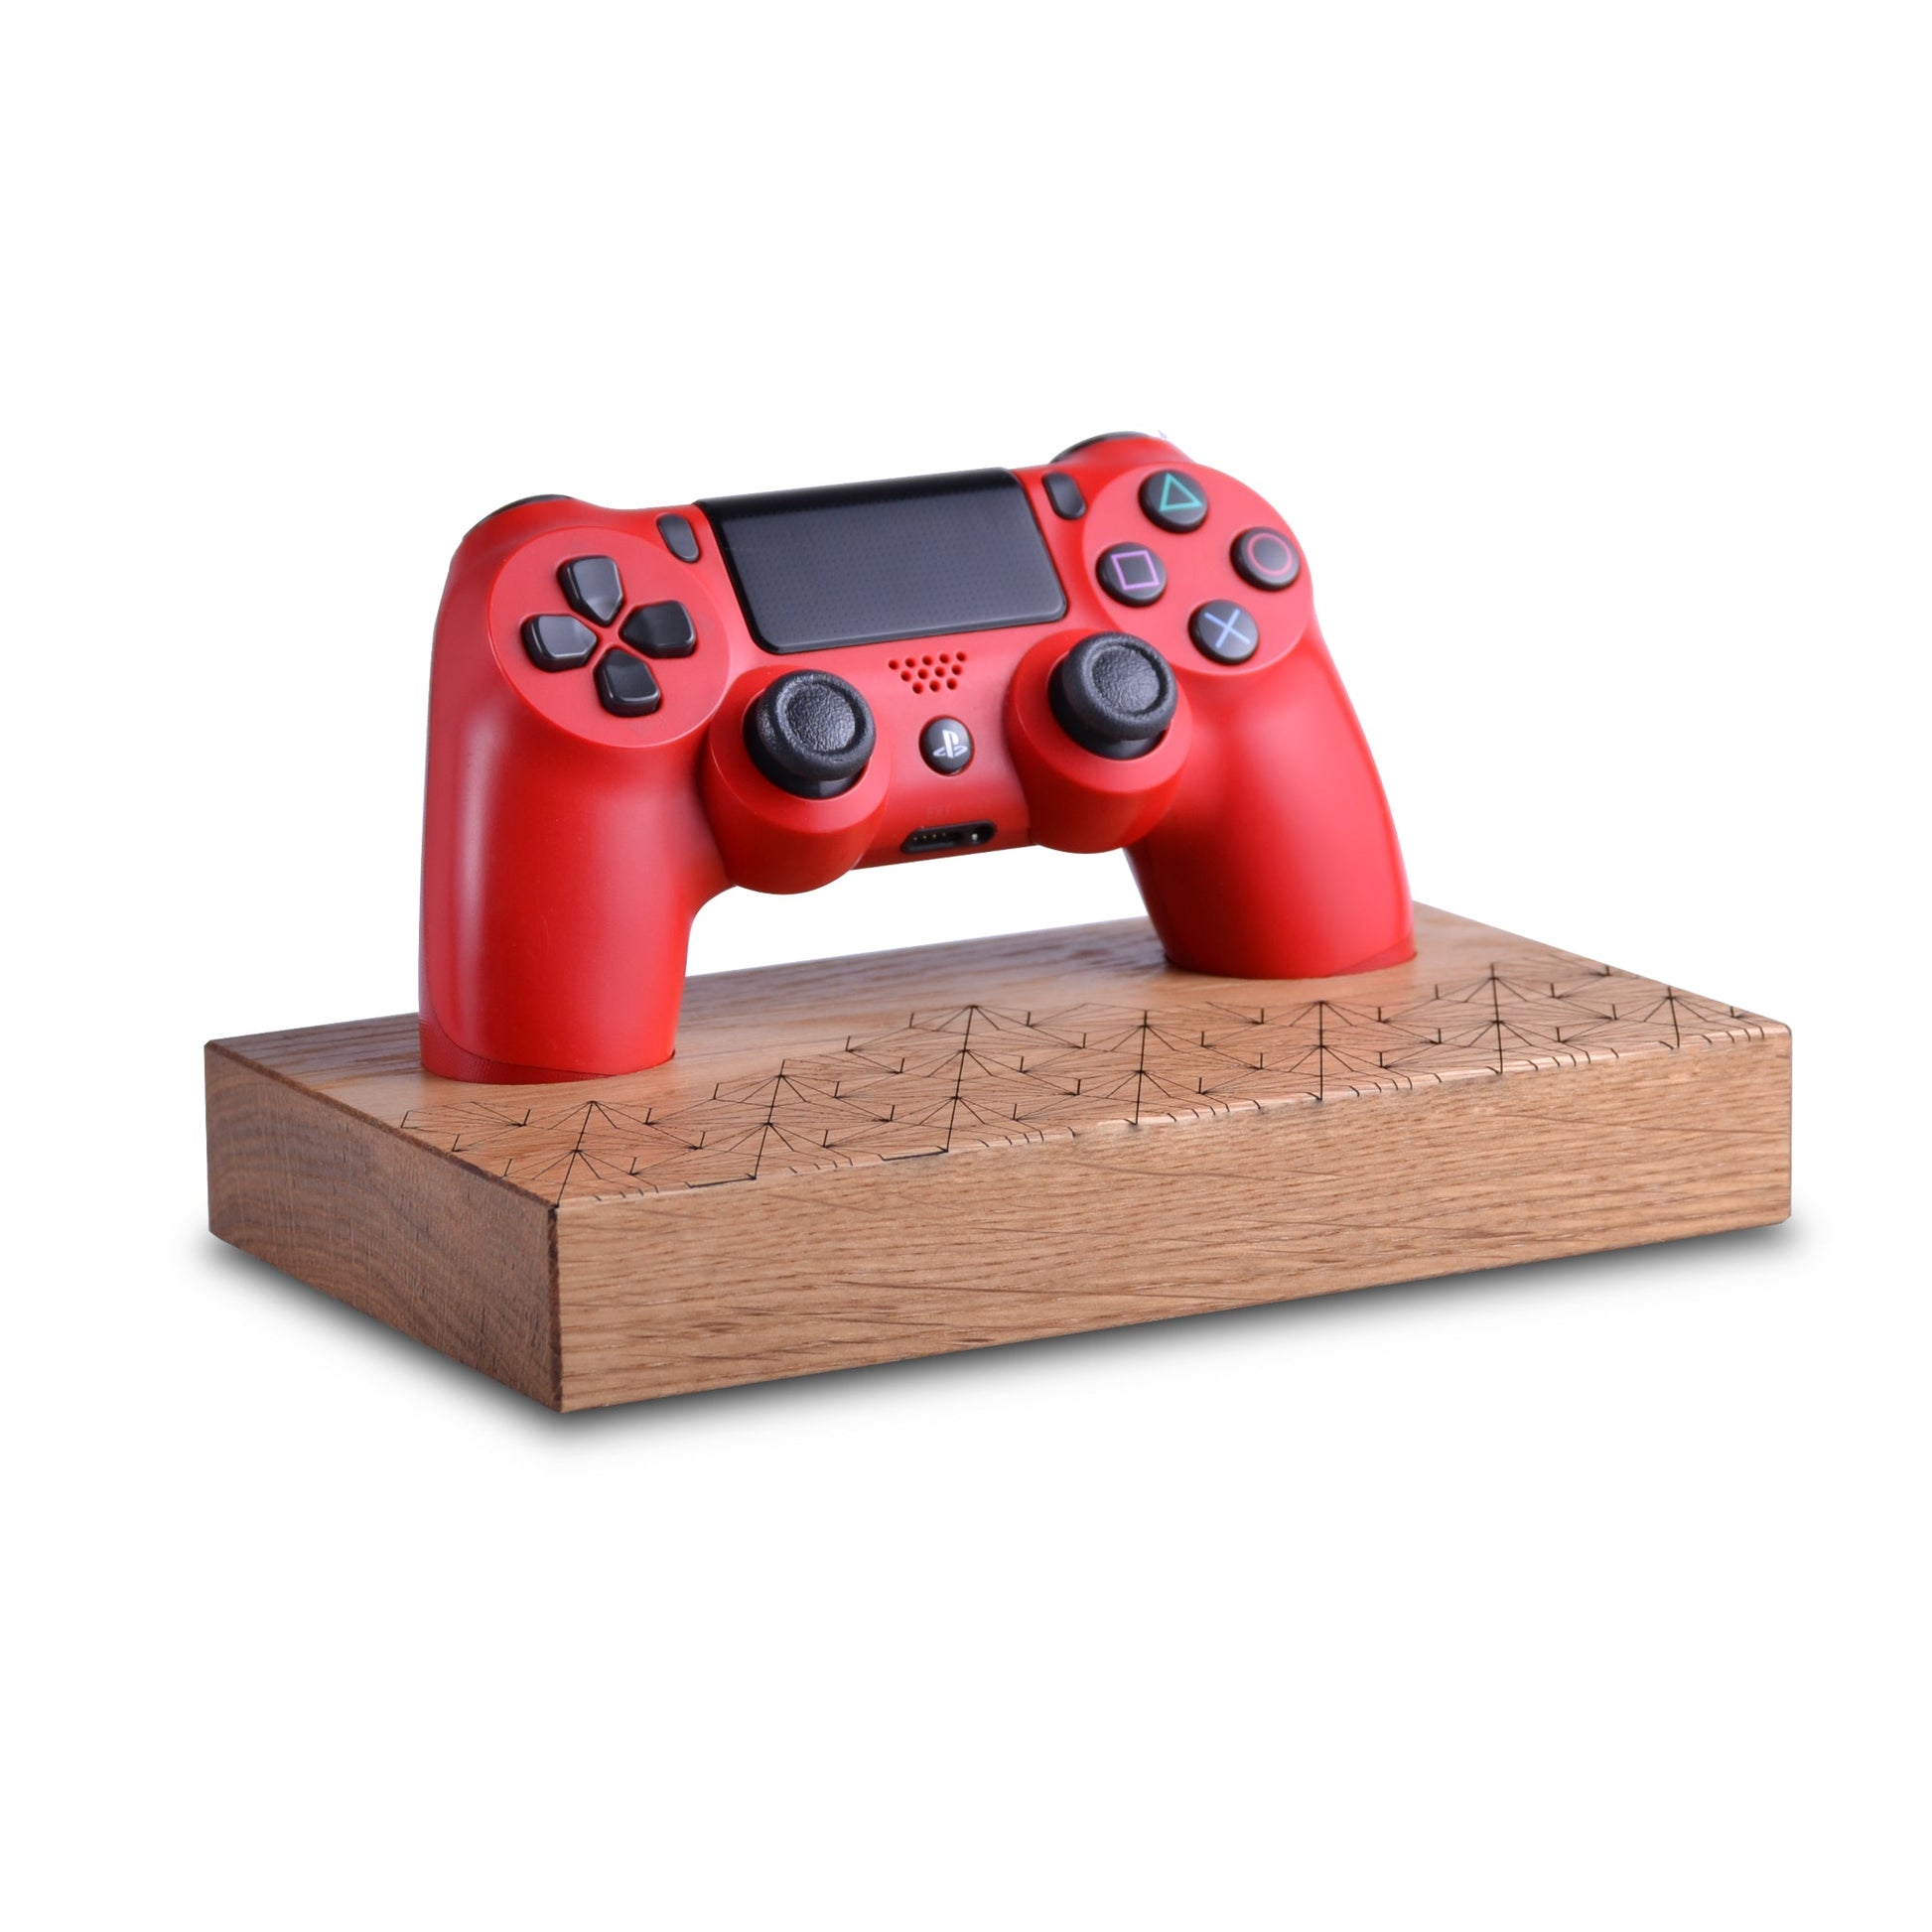 Wooden stand with geometric pattern for Playstation 4 Dualshock Controller